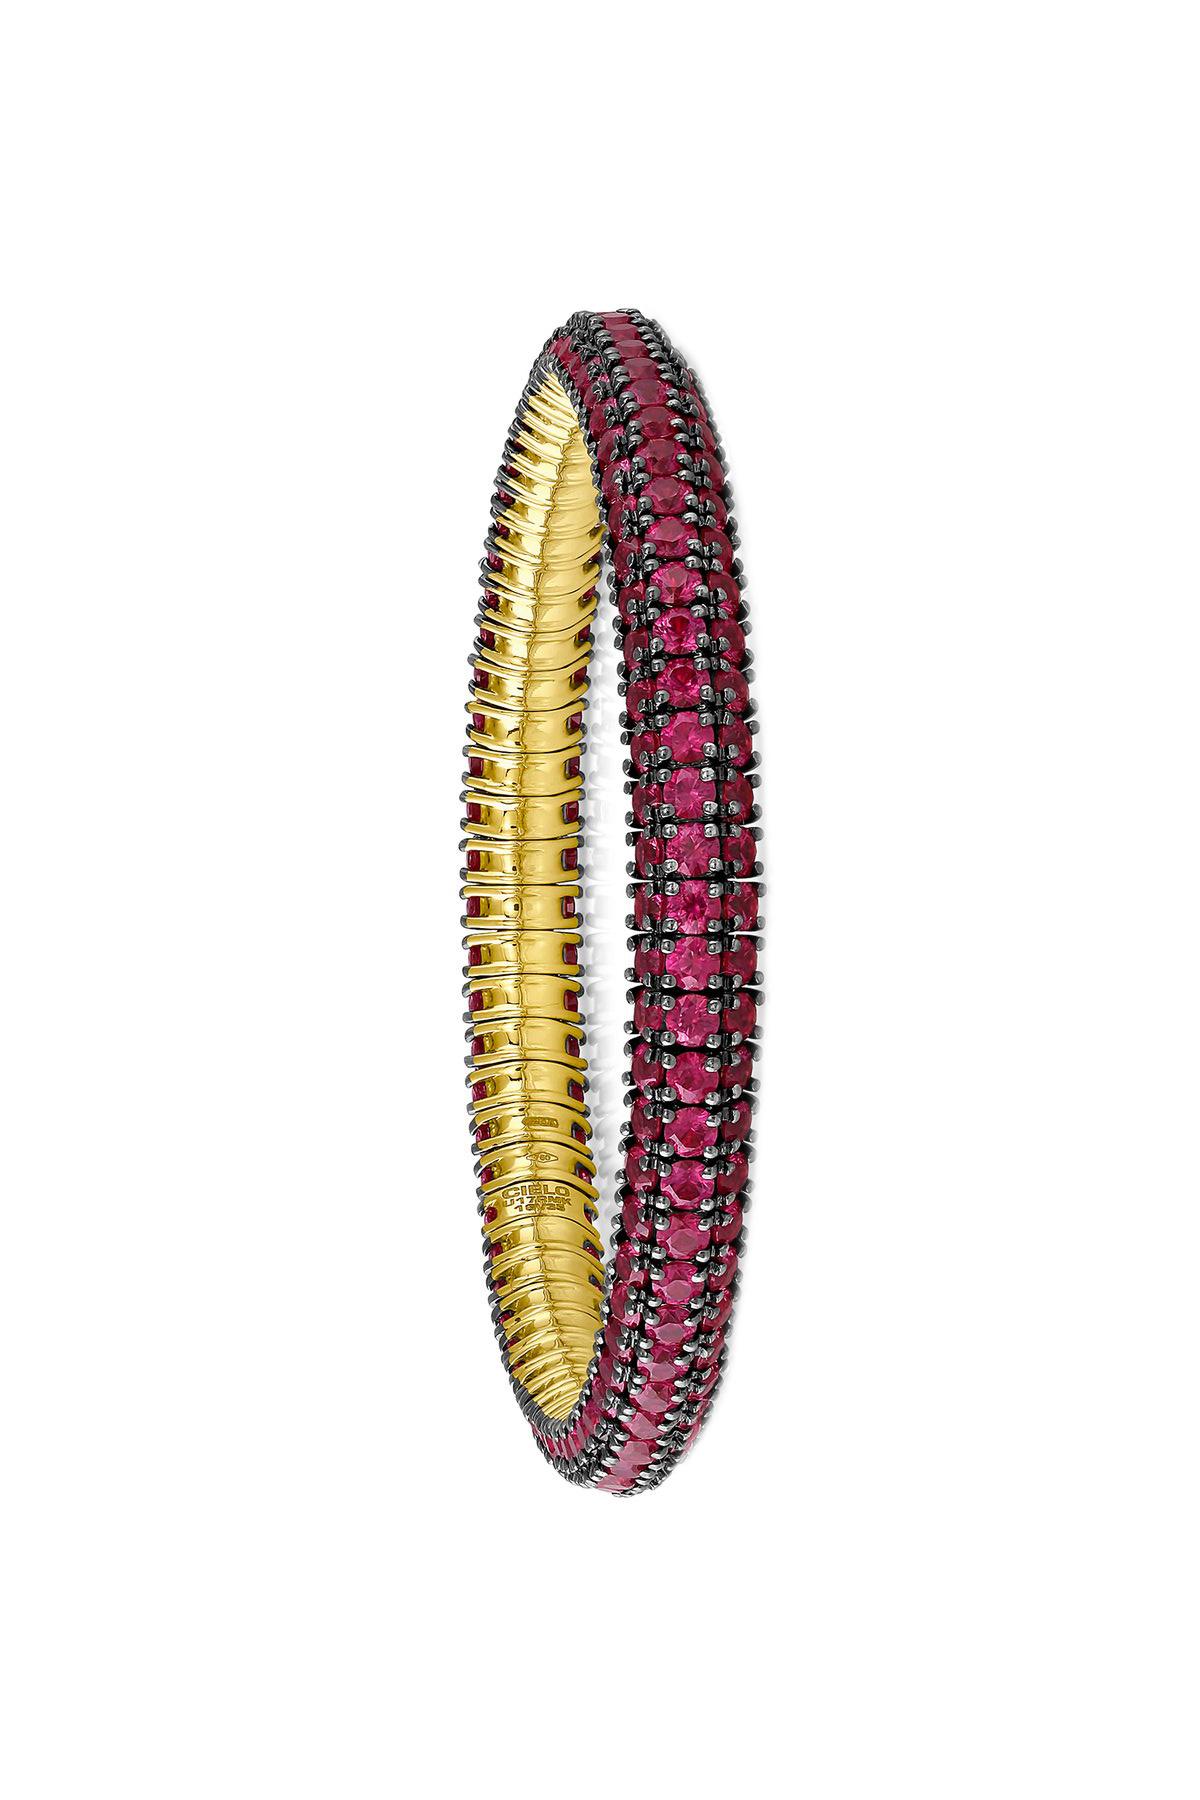 18kt Rose Gold Mattia Cielo Universo 3 Pietre Ruby Bracelet. Diamond Total Weight Is 18.10 Carats With 14.67 Carat Total Weight Of Rubies. 